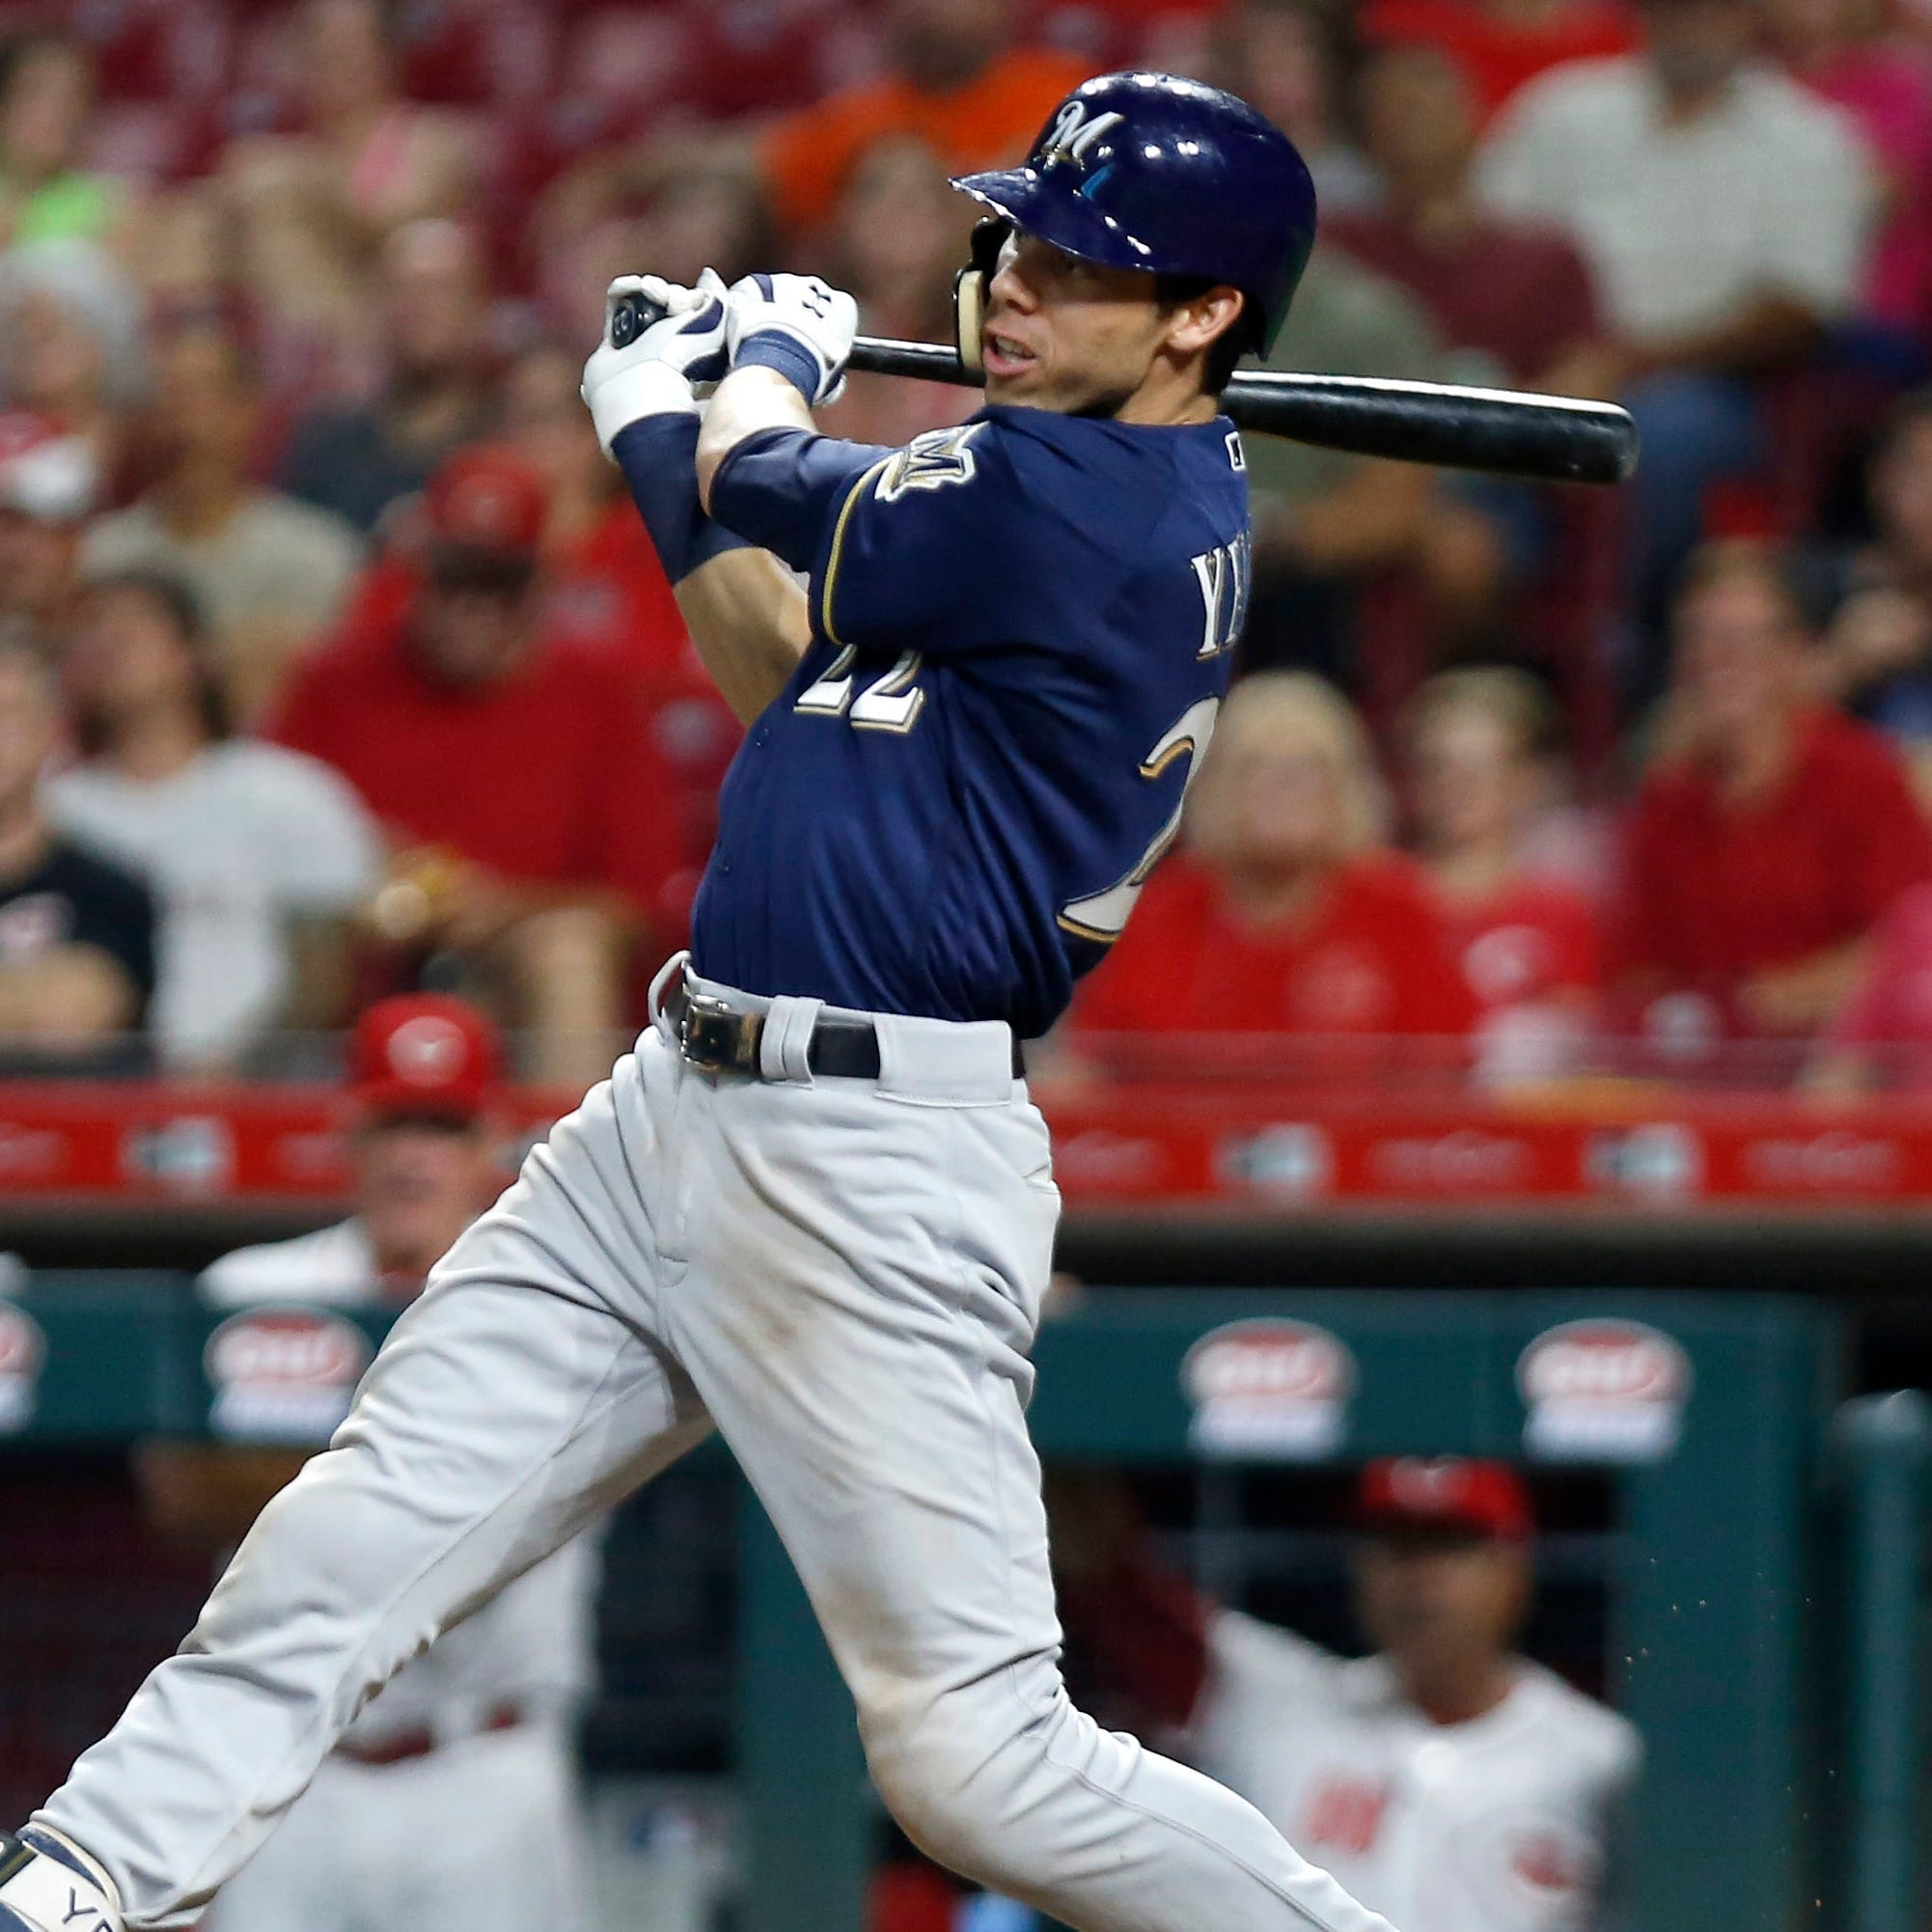 Christian Yelich hit for the eighth cycle in Brewers franchise history.